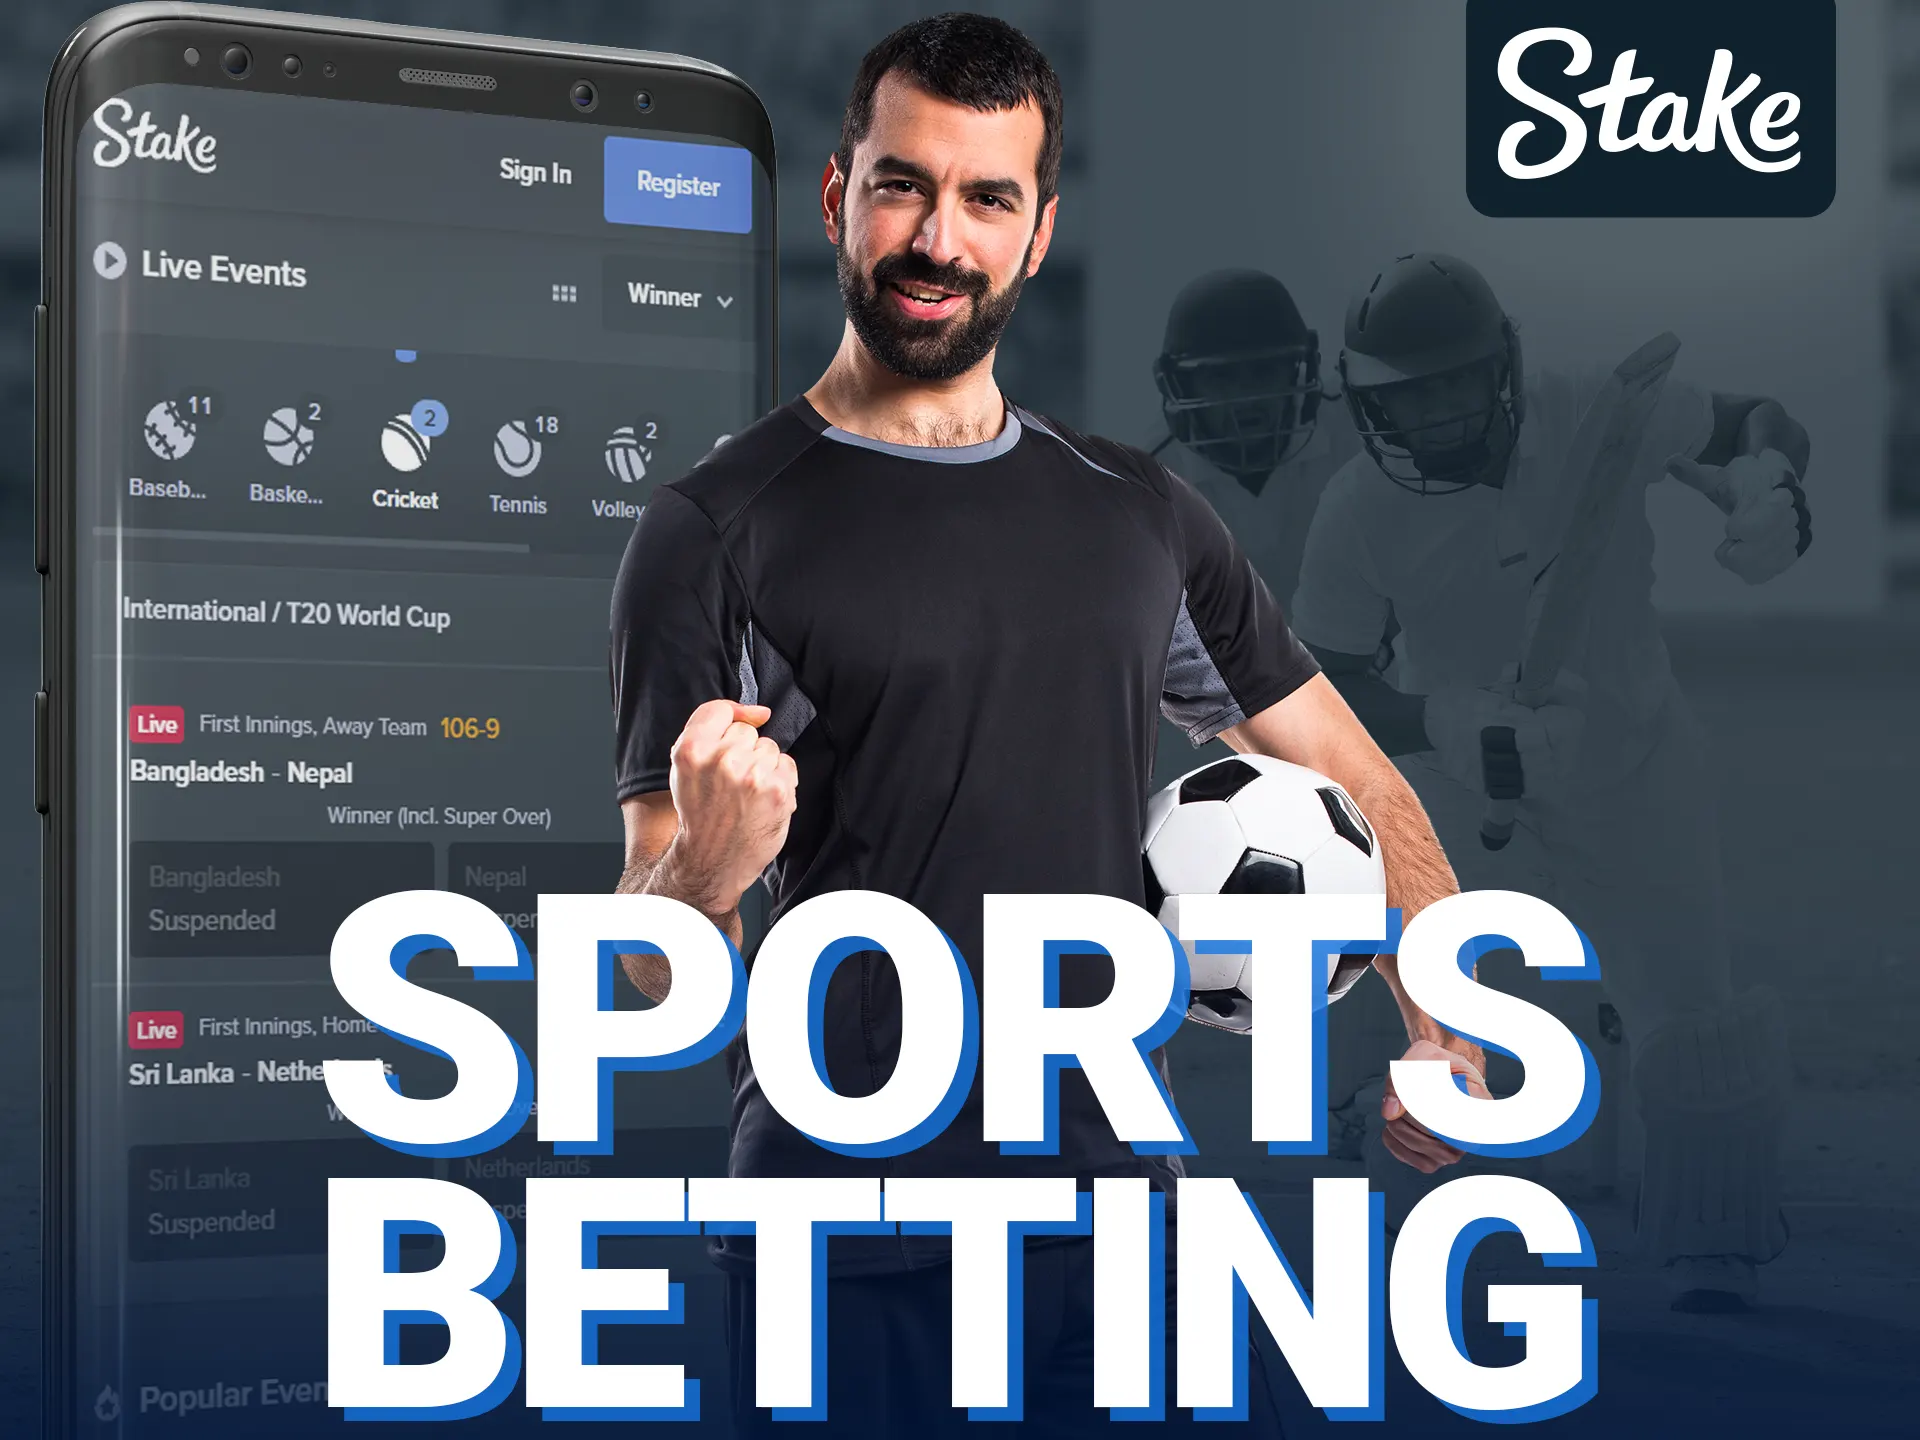 Stake app offers comprehensive sports and esports betting.